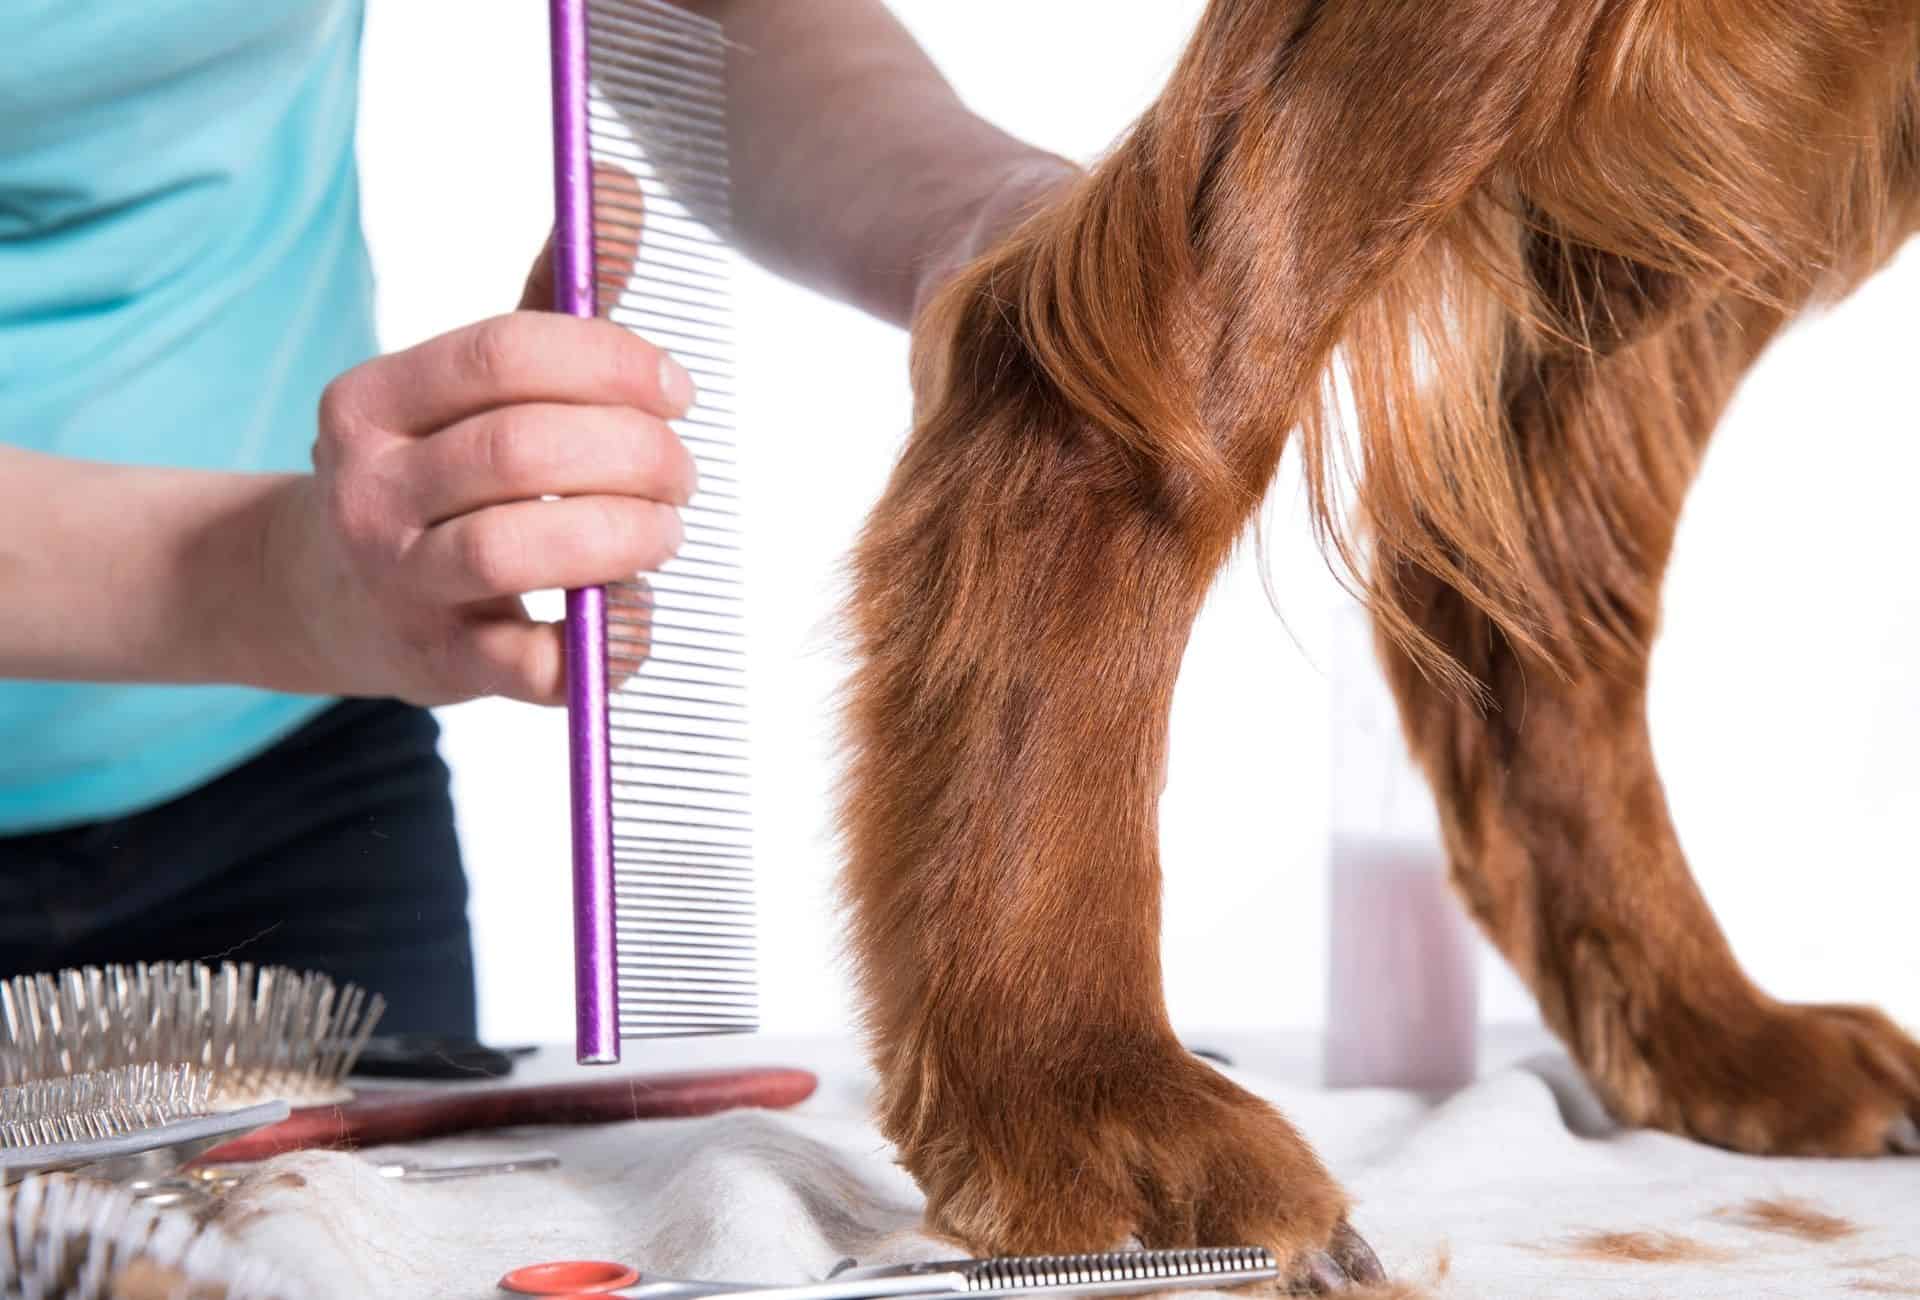 Dog is groomed and cutting or improperly grooming the hair around the anal region can cause a swollen rear end.